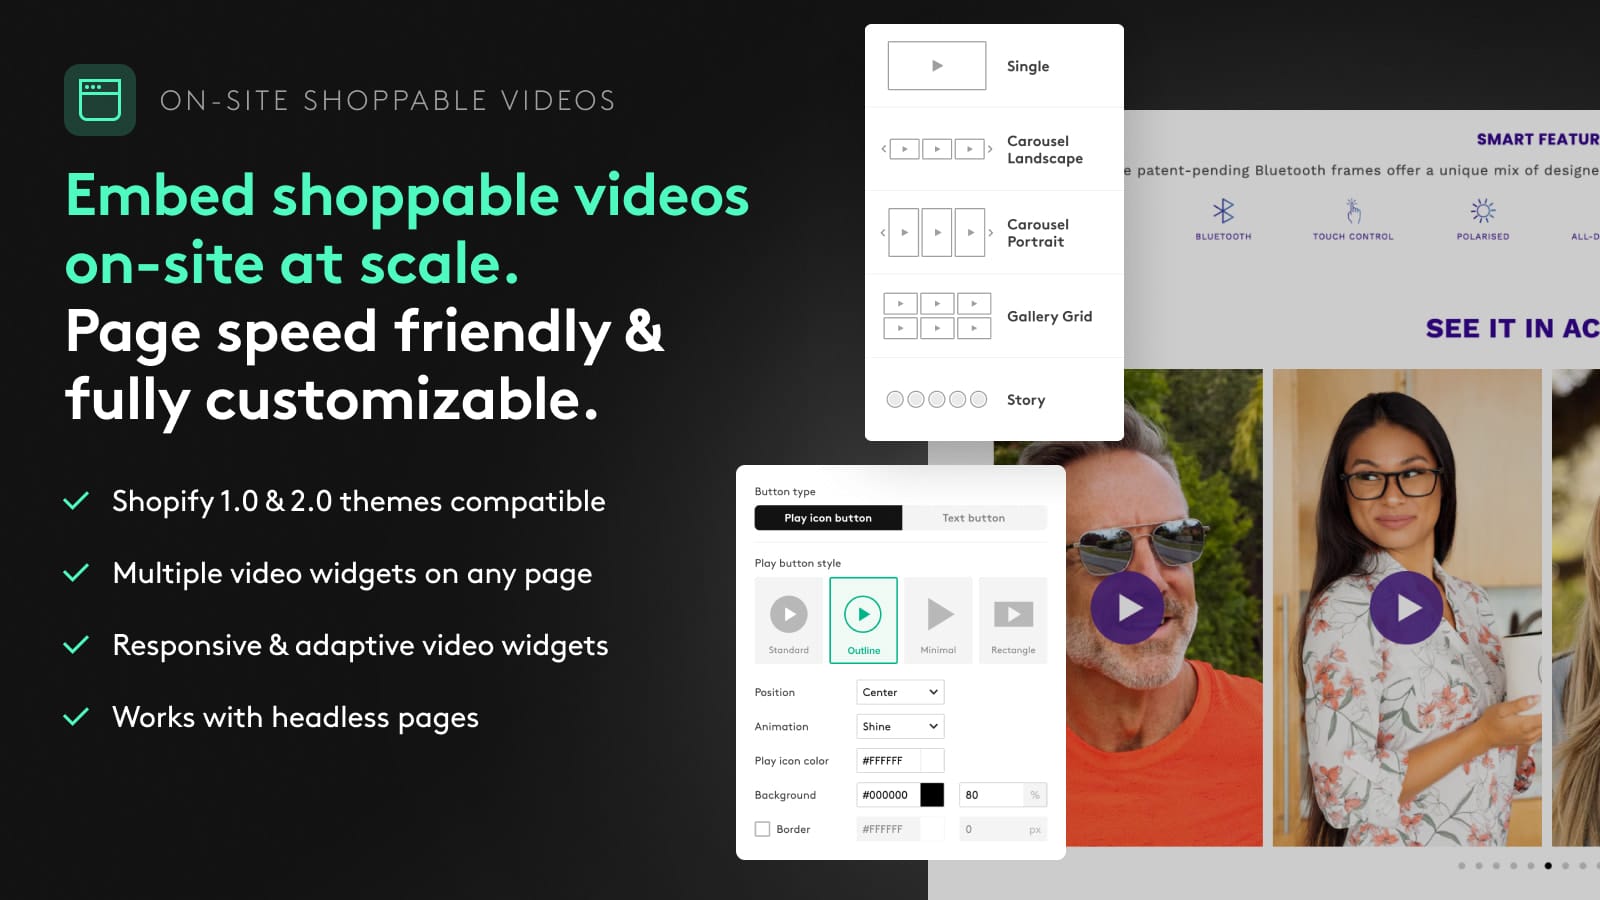 Videowise Shoppable Video UGC